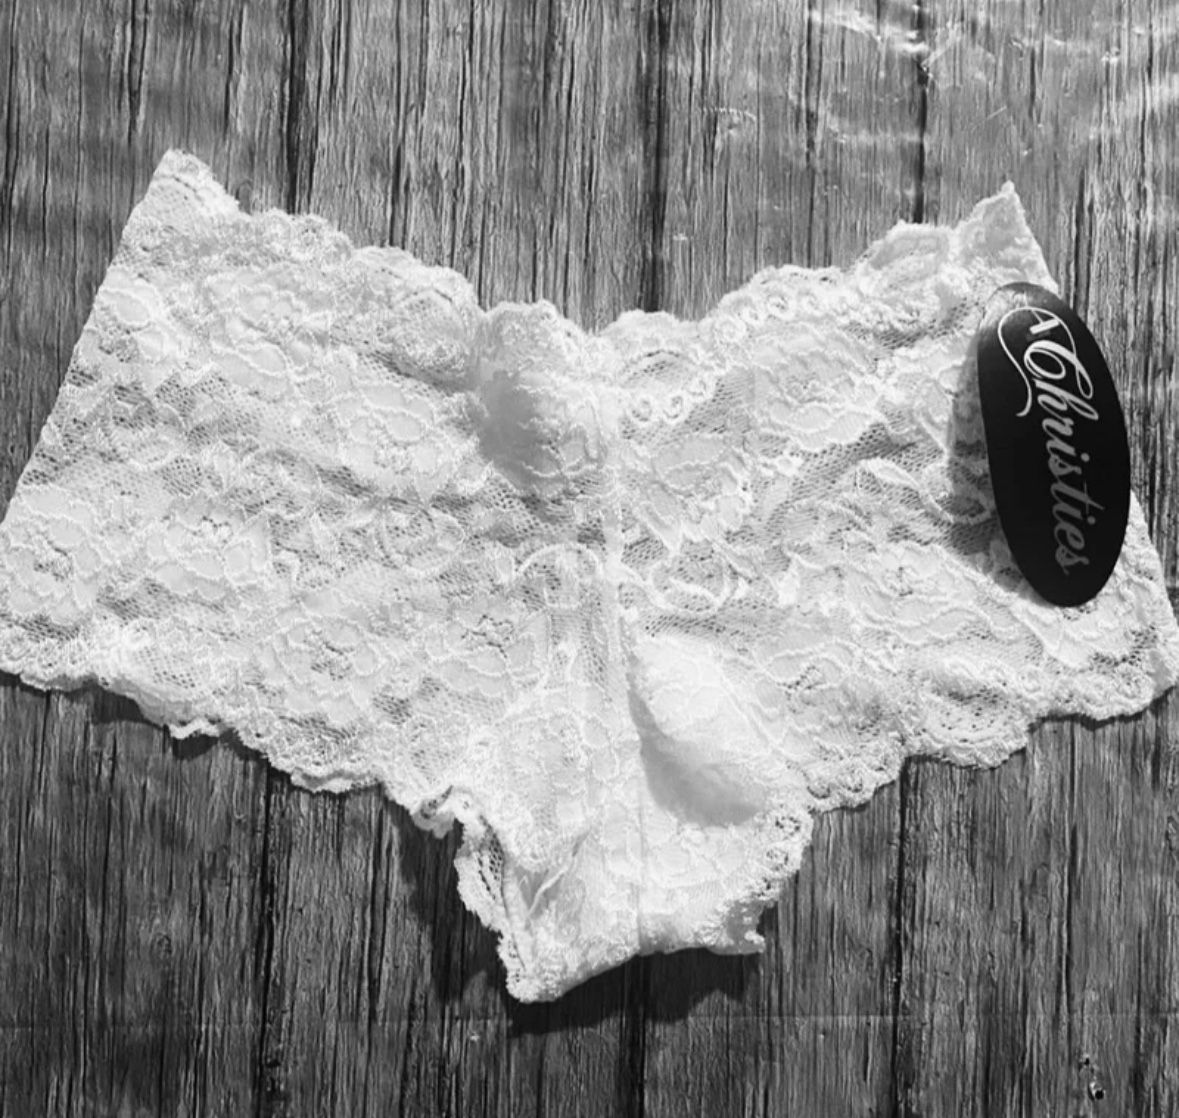 New Women’s Small White Cheeky Lace Panties